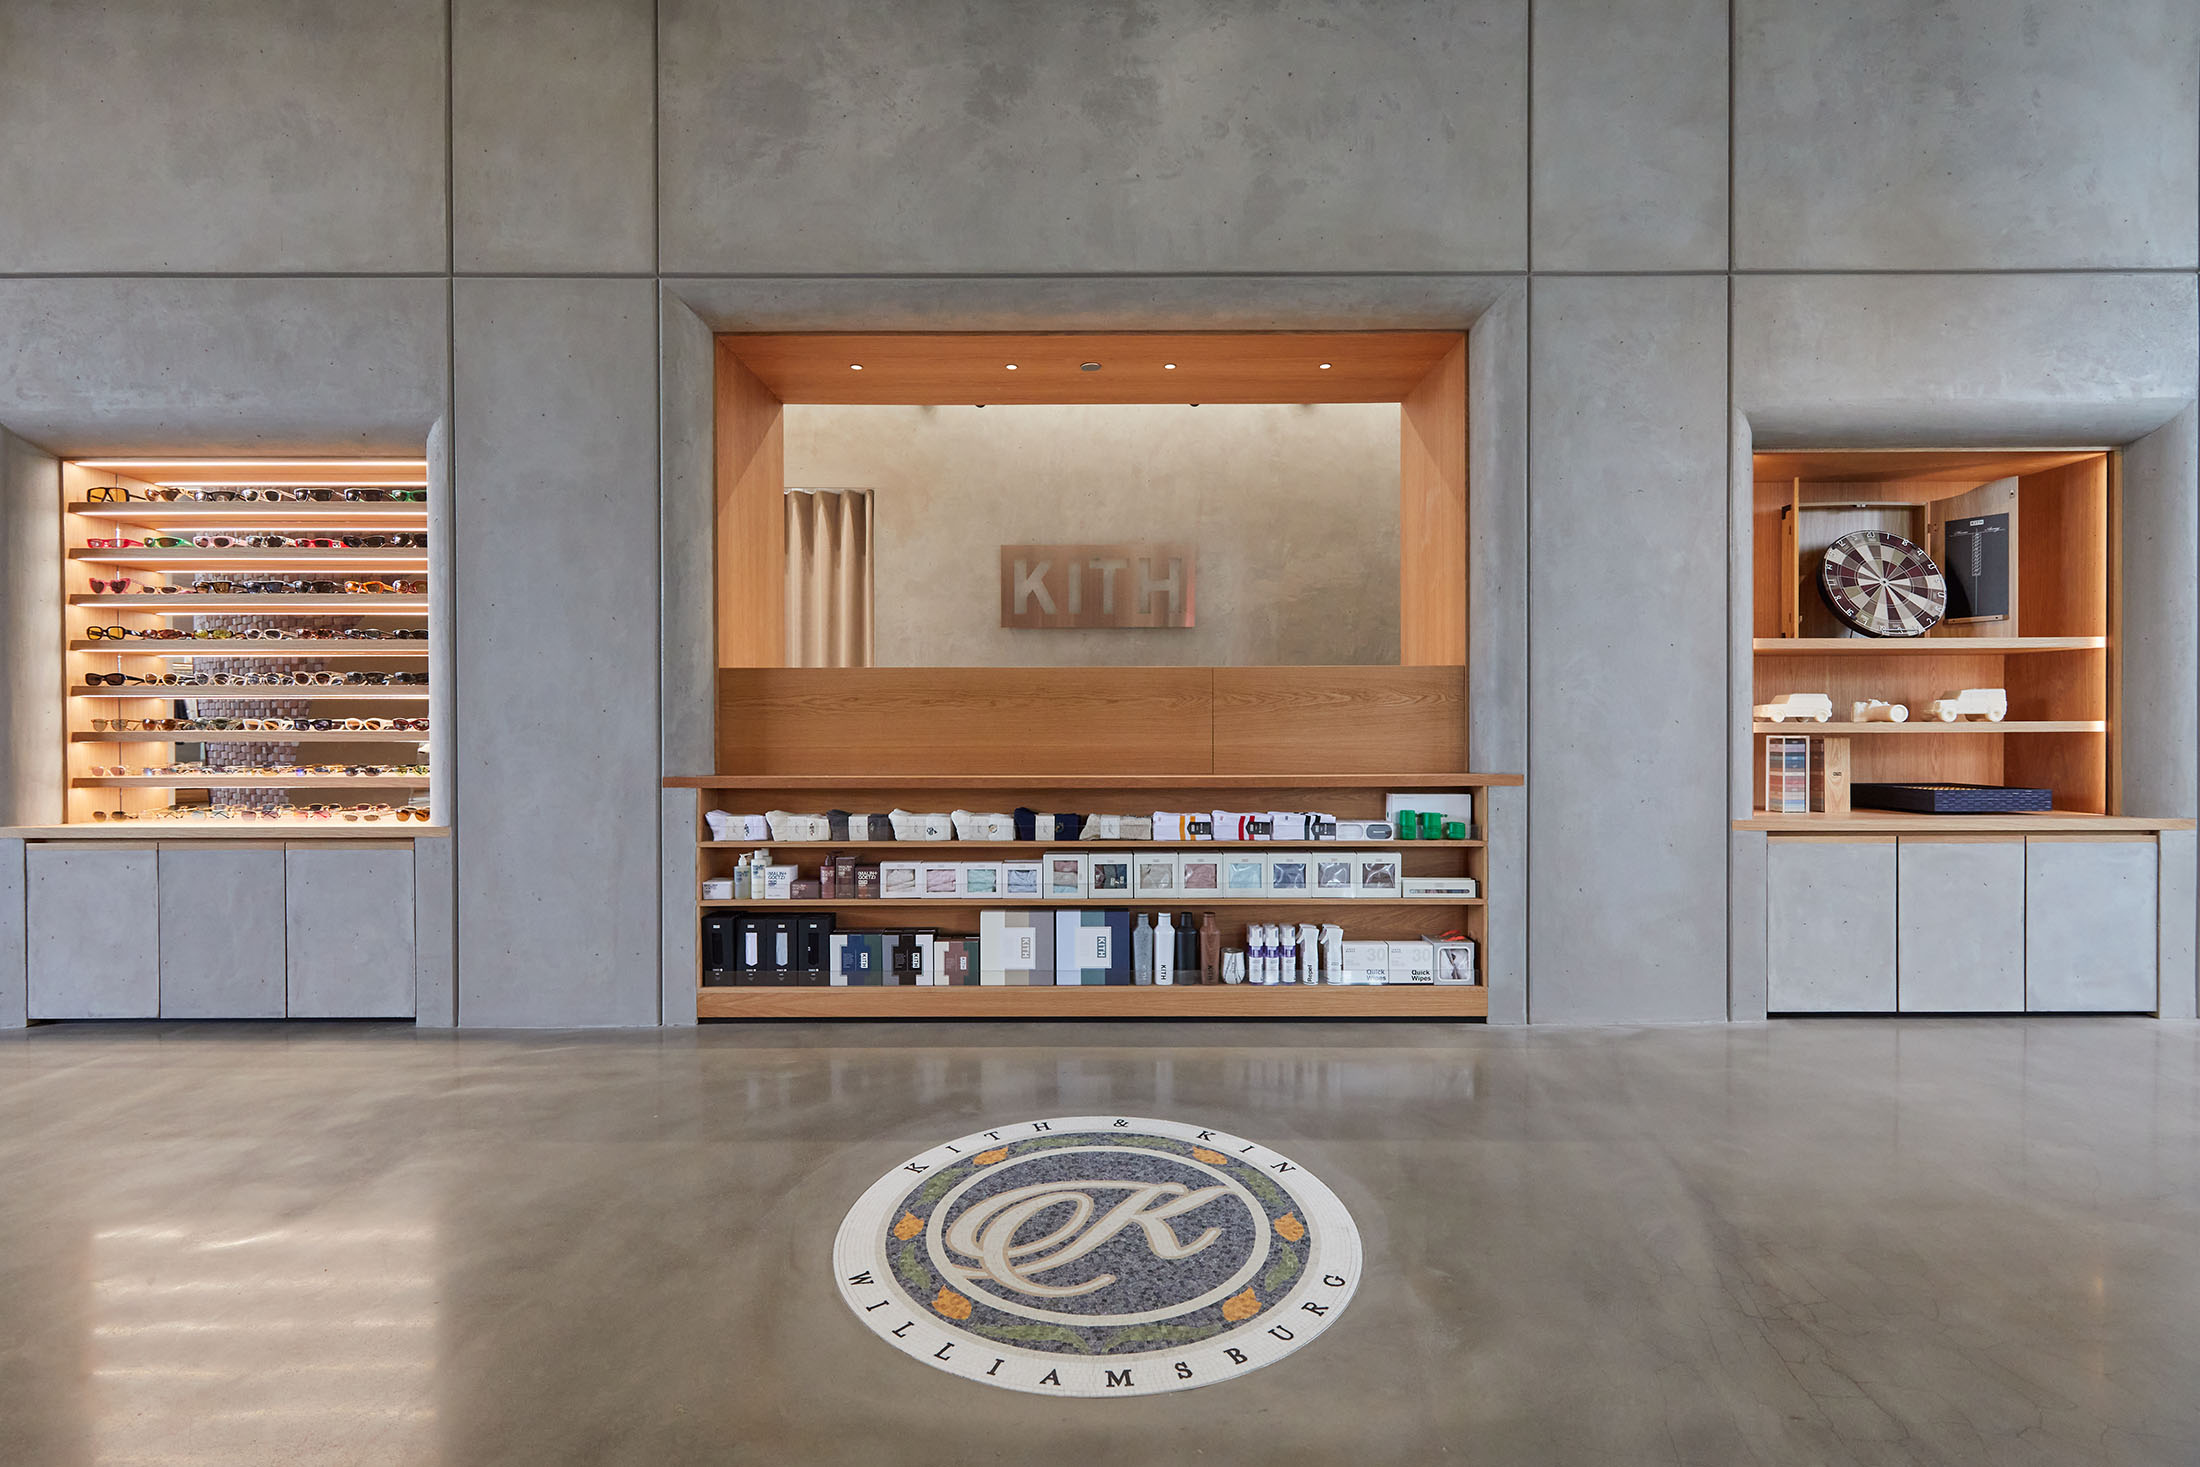 Kith Announces Opening of Williamsburg Flagship